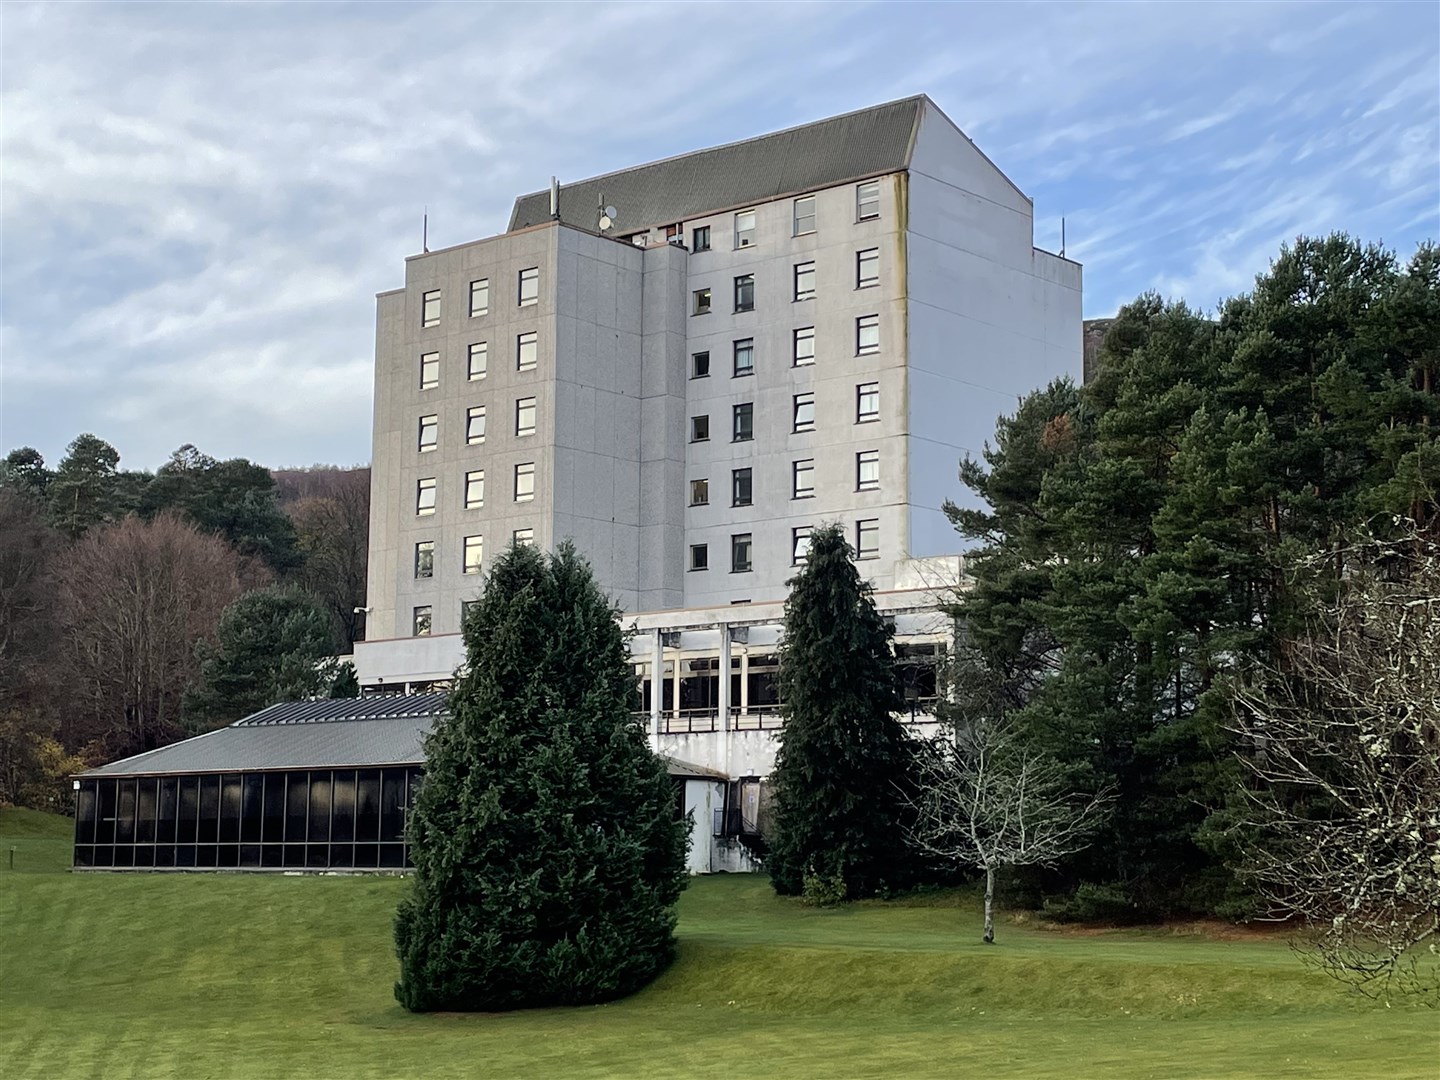 Macdonald Hotels has said issues raised by the refugees have been addressed at their temporary home at the Strathspey Hotel.